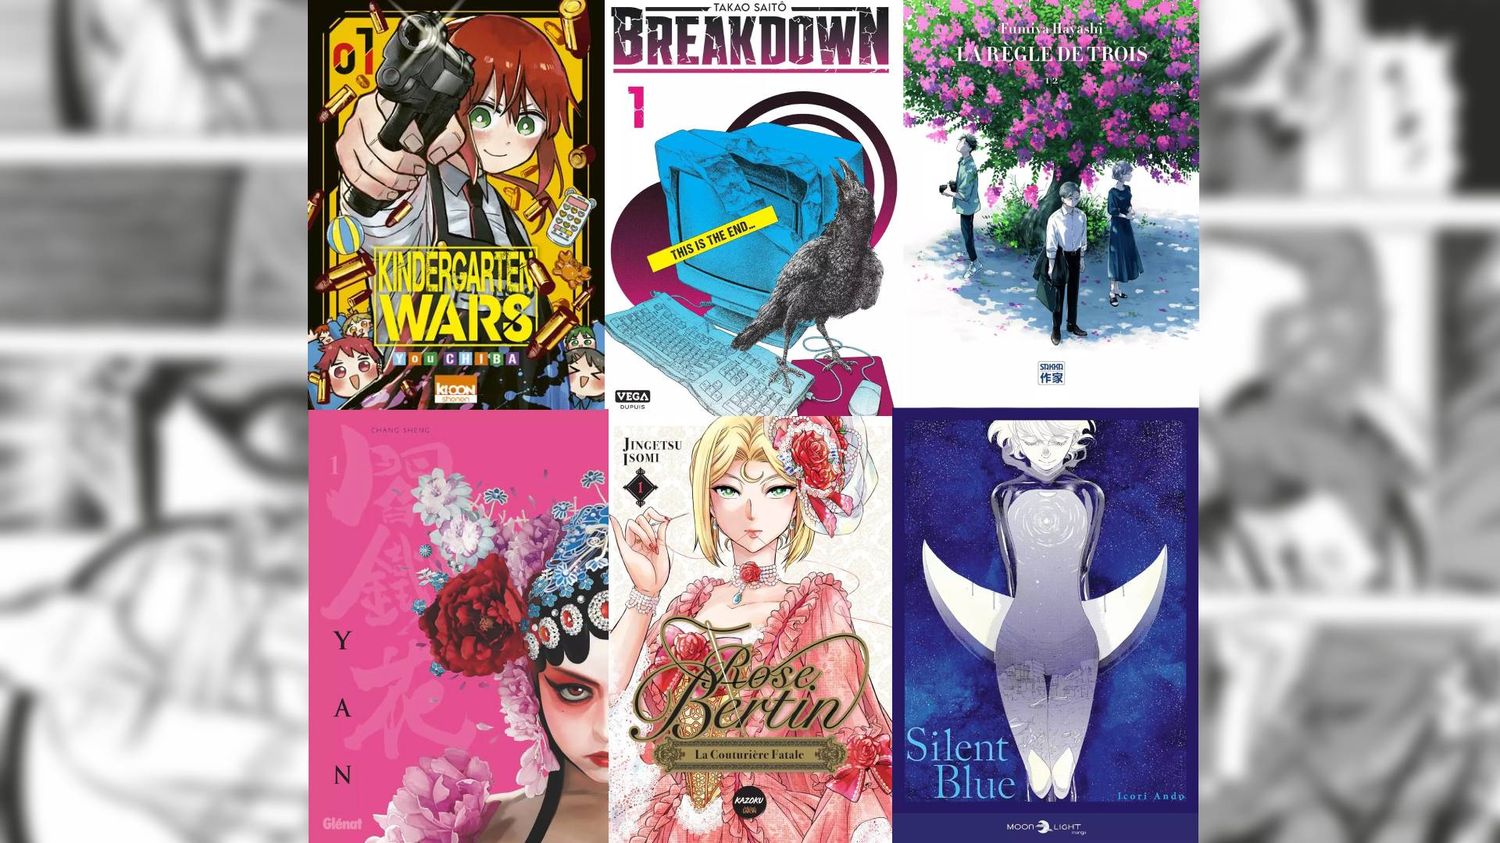 Manga: in our selection for April, action, history, humor, poetry and survivalism